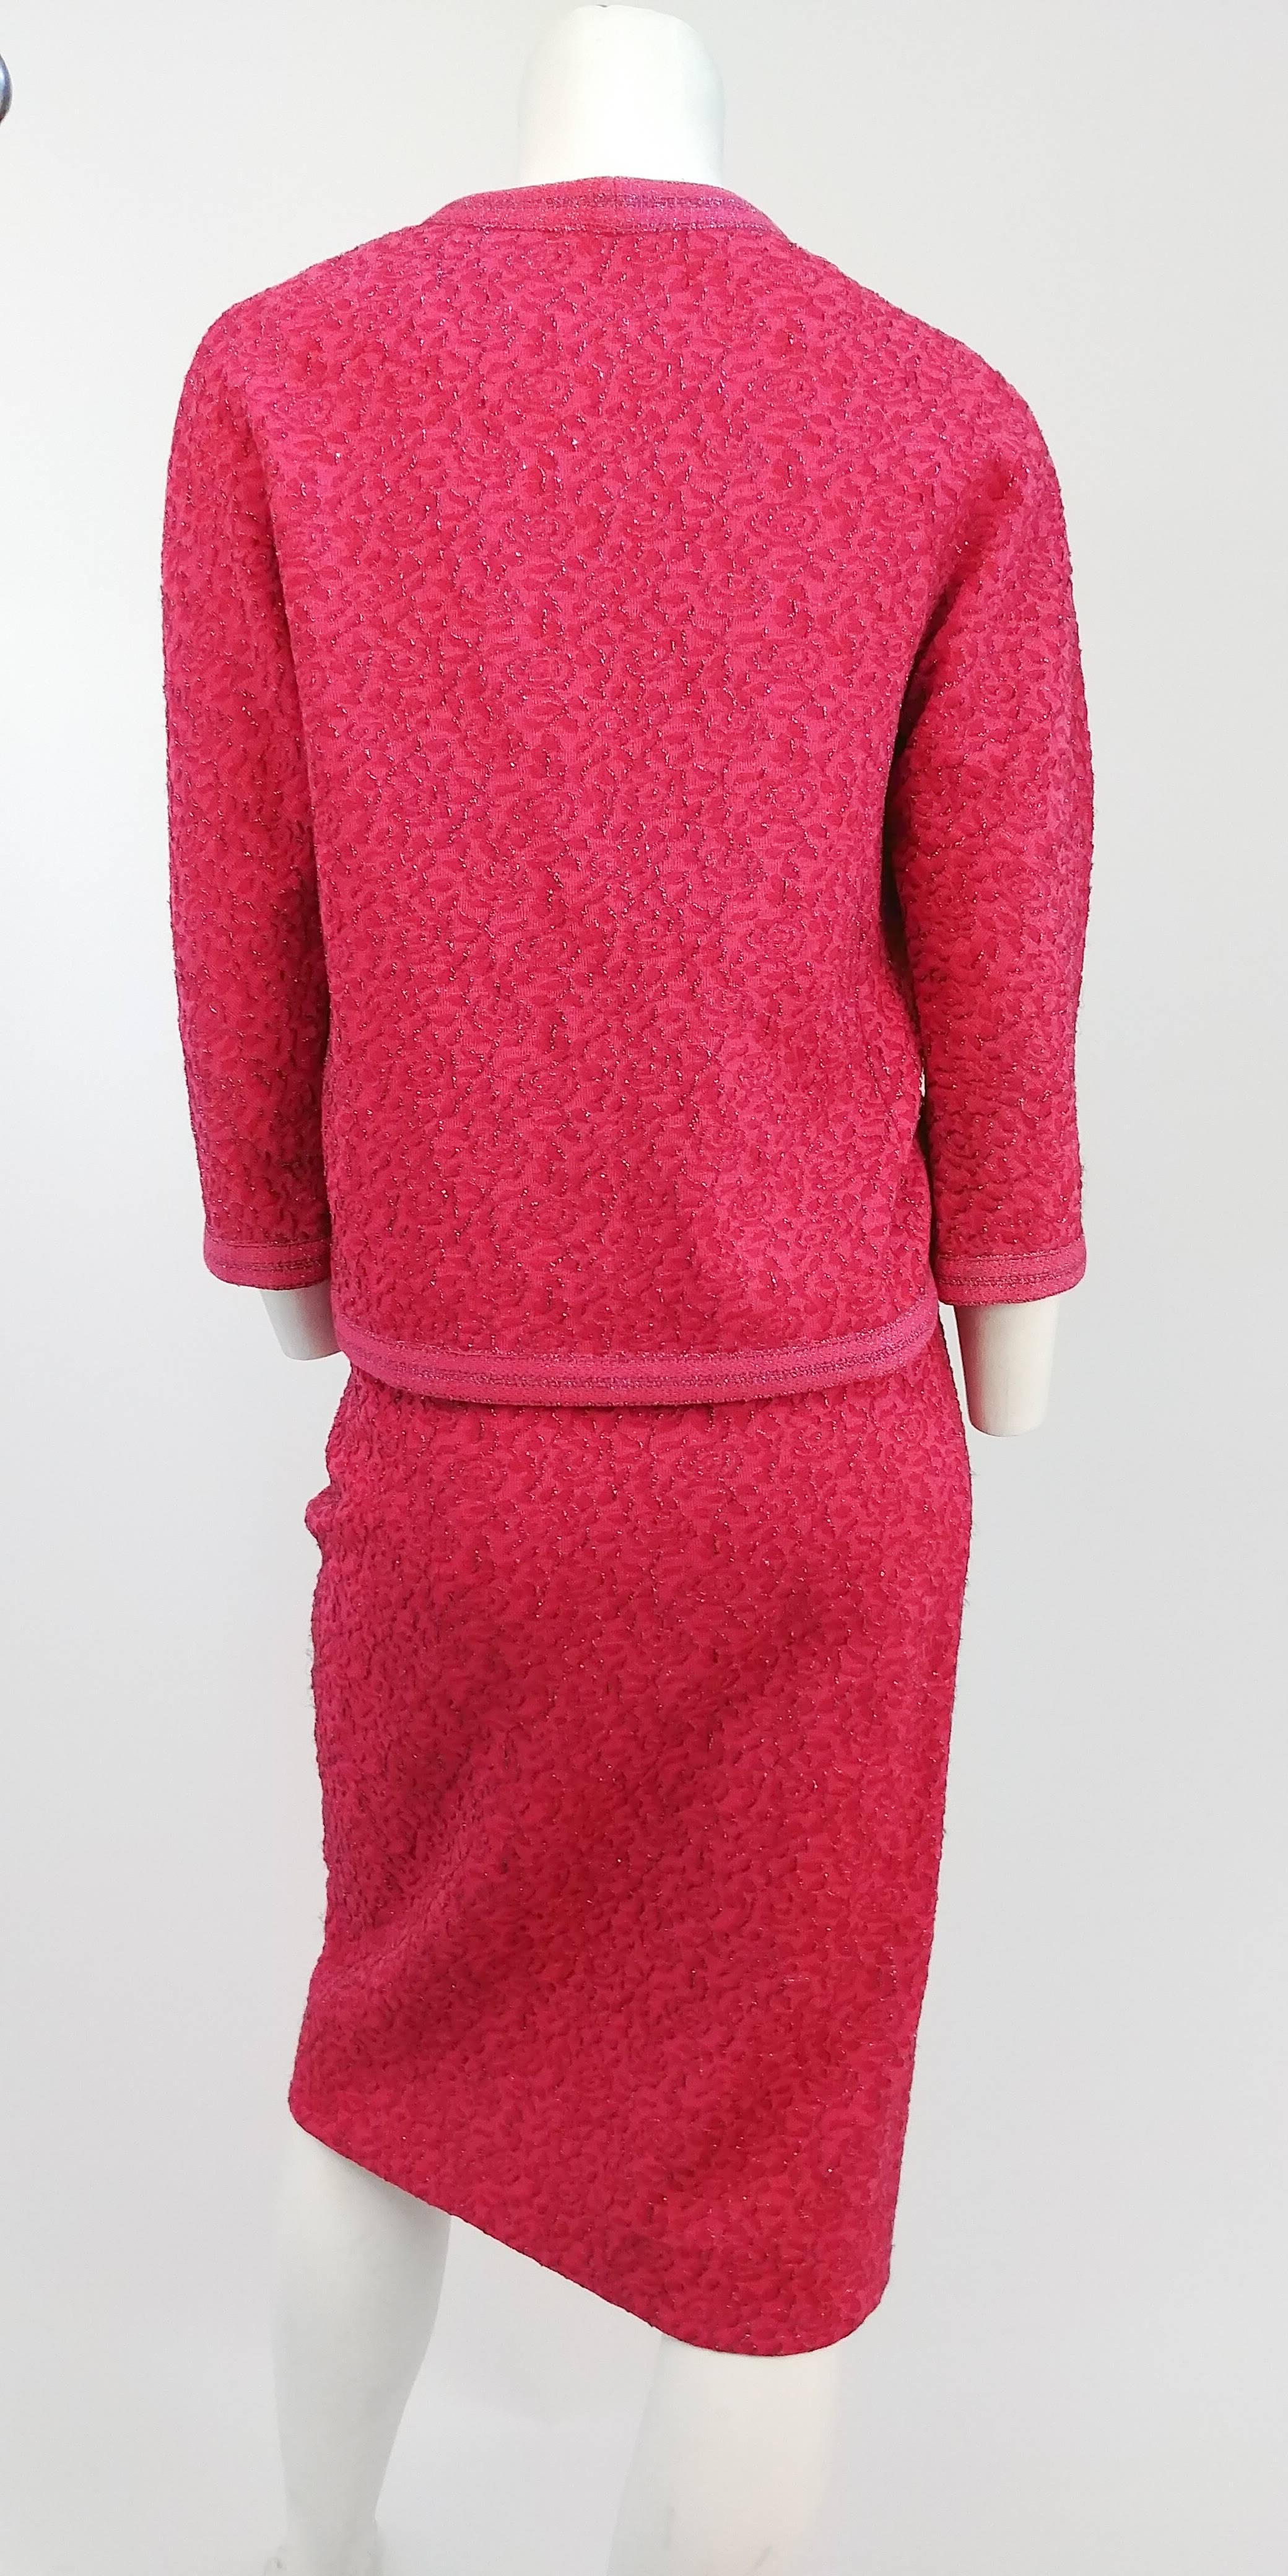 60s Hat Pink Sweater and Skirt Set. Classic 1960s suit set in bold pink color and metallic rose motif woven in fabric of skirt and sweater. 